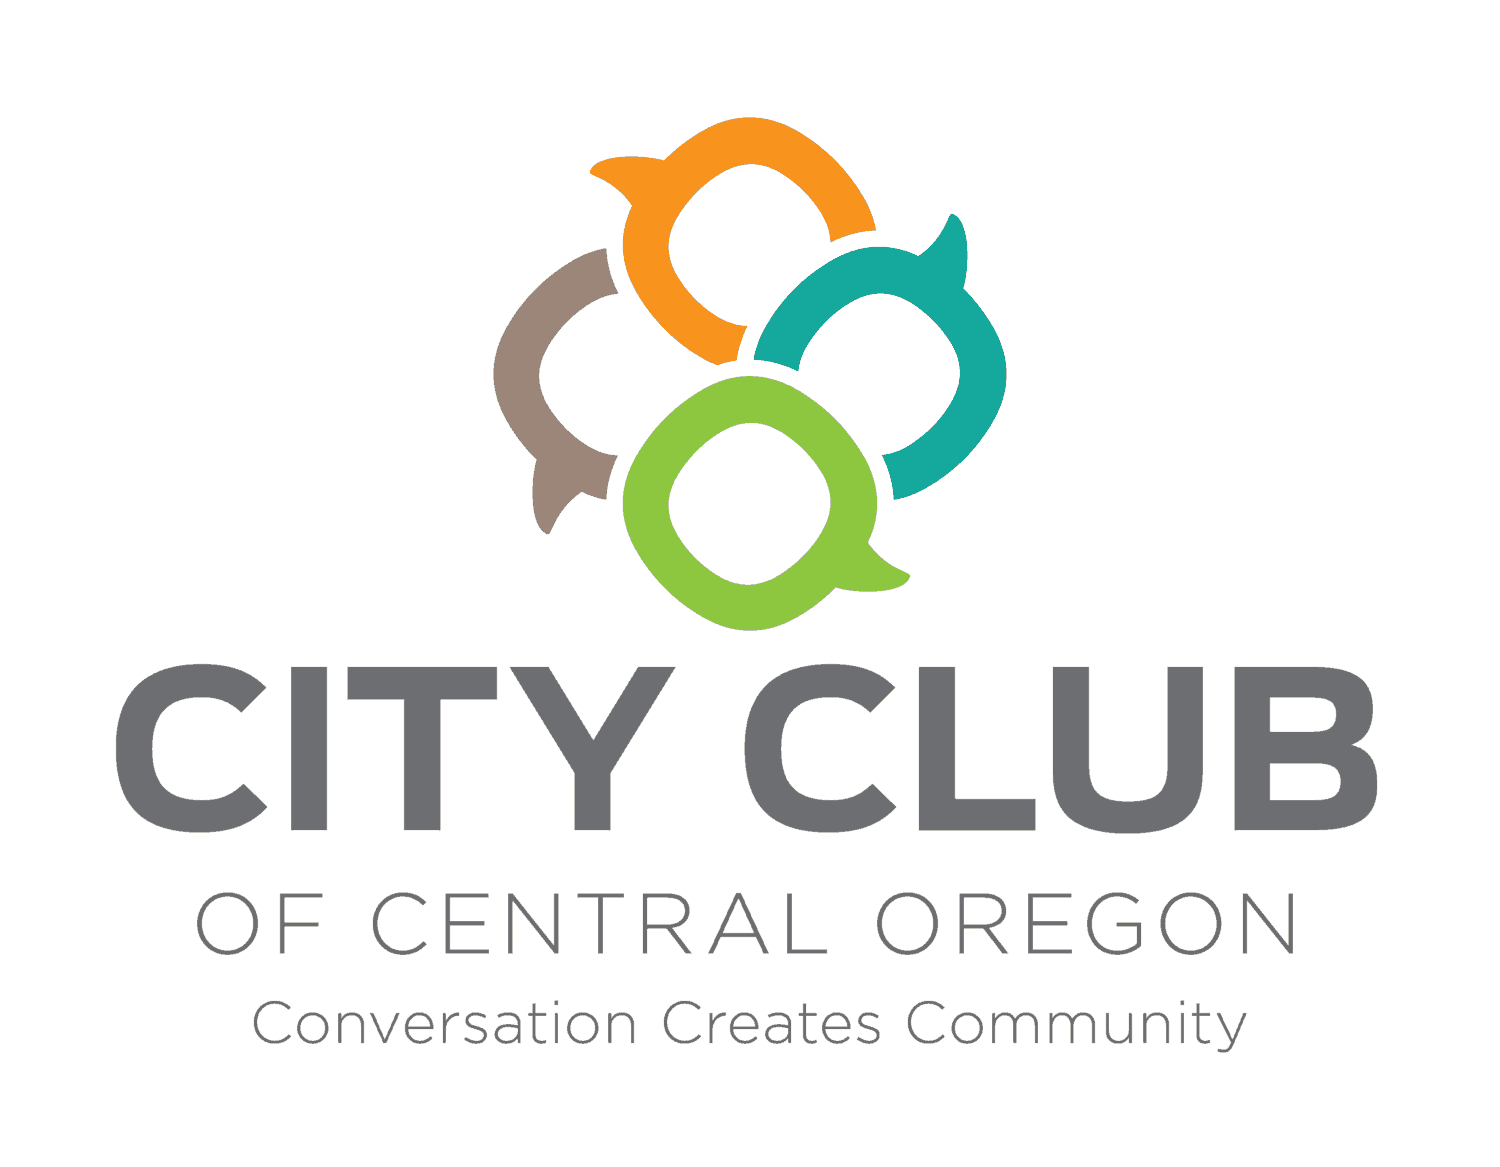 Oregon's Logo - City Club of Central Oregon's New Logo Signifies Growth